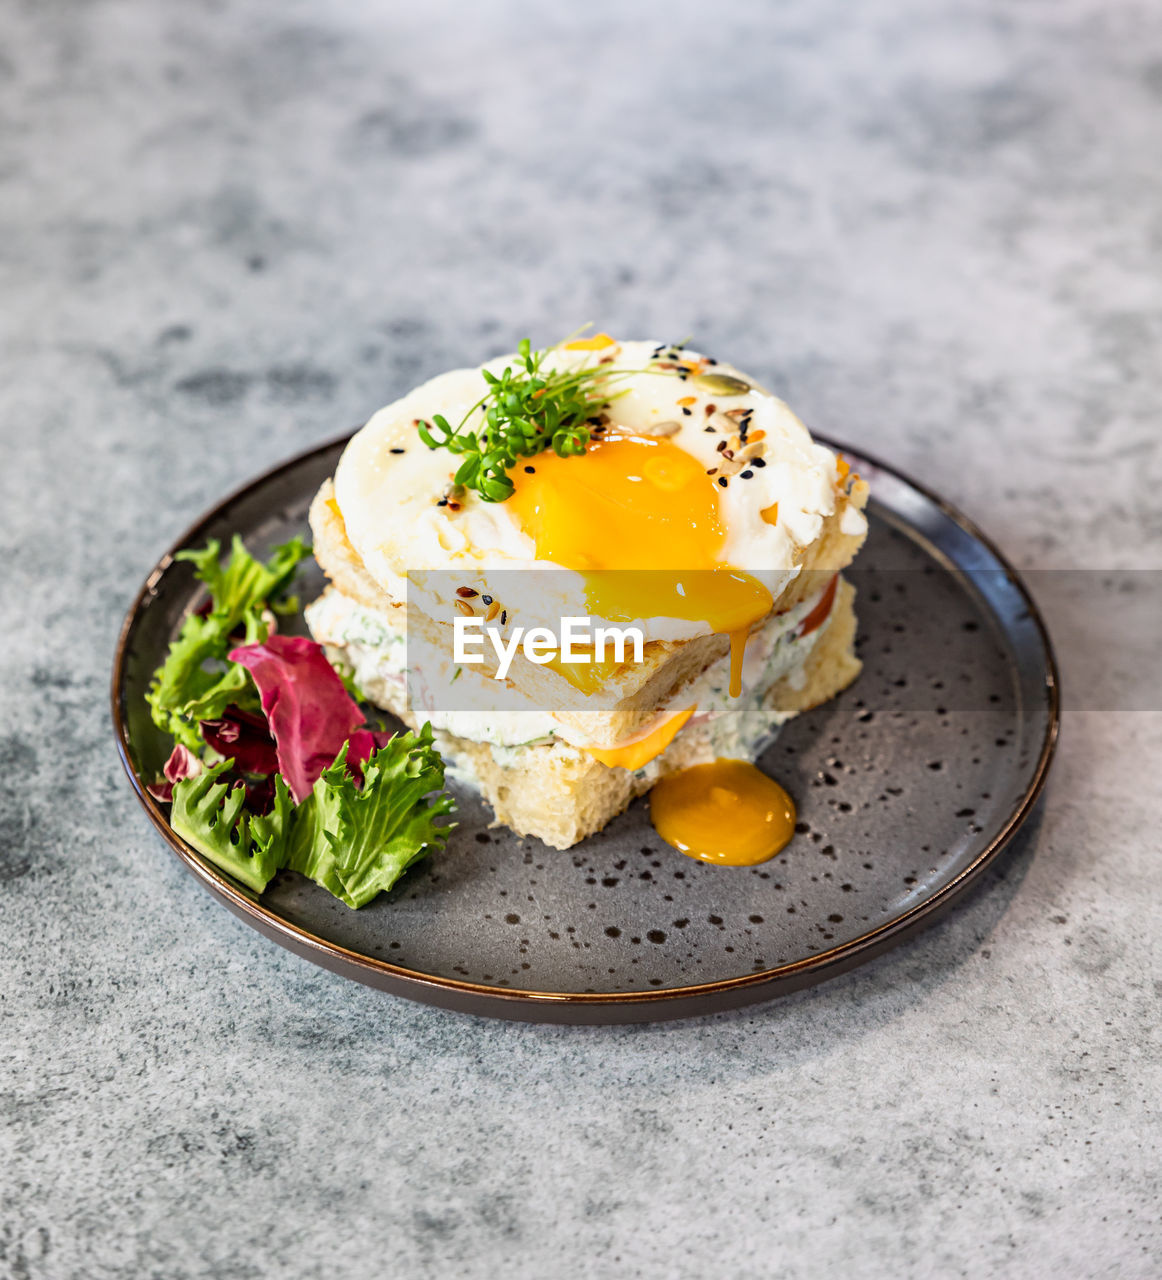 food and drink, food, healthy eating, egg, meal, dish, wellbeing, freshness, egg yolk, fried egg, vegetable, produce, studio shot, plate, gray, fried, no people, breakfast, gray background, indoors, fruit, high angle view